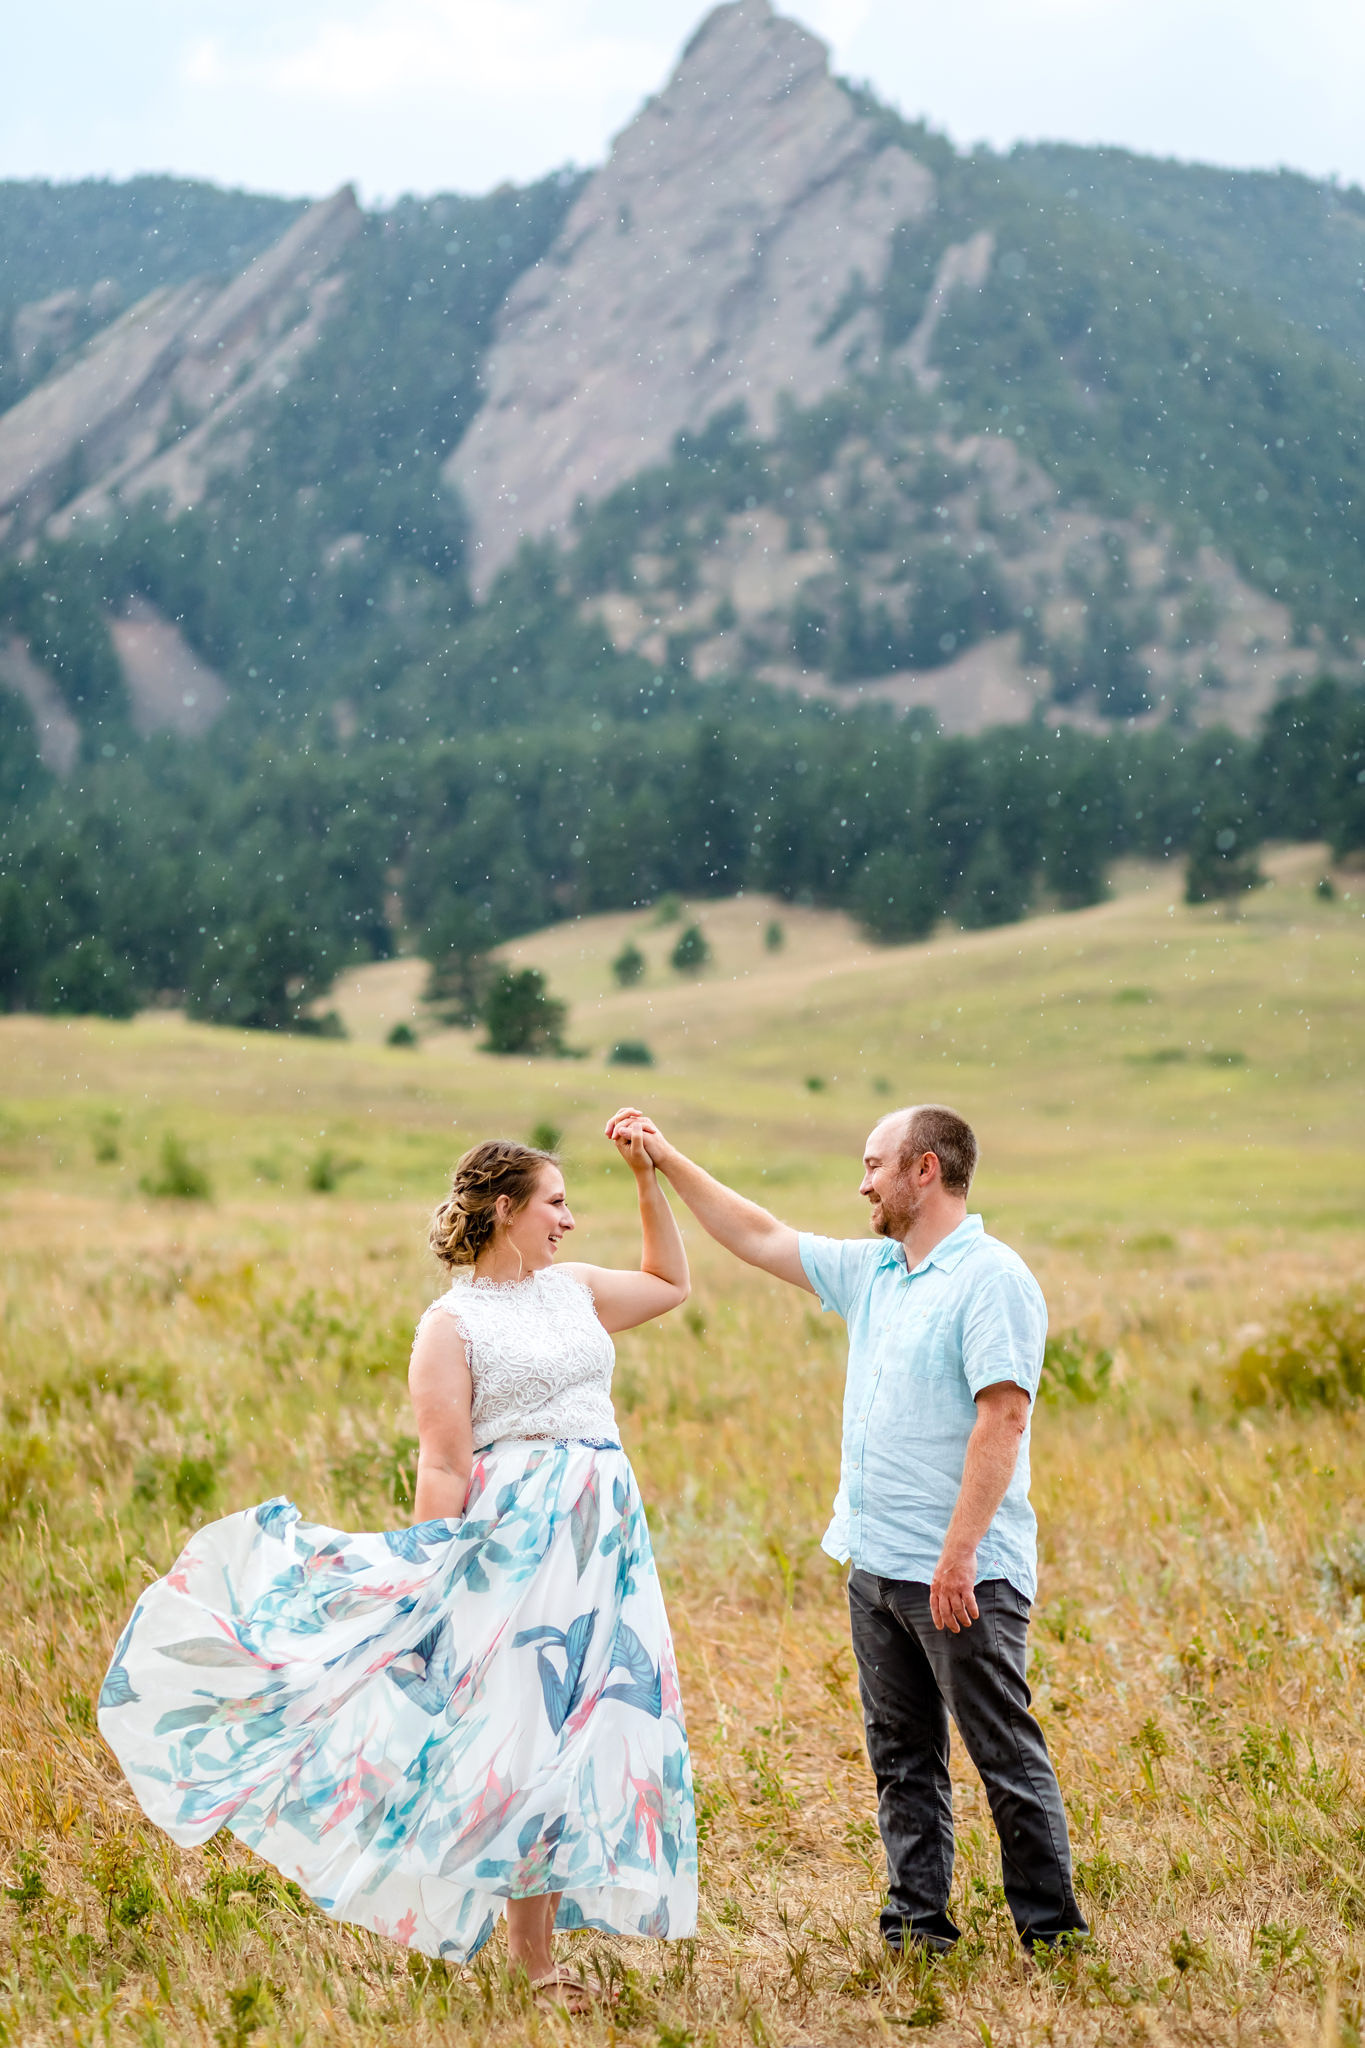 Lauren & Taylor dancing in the rain in a field at Chautauqua Park in front of the Colorado Flatirons. Mountain Fall Engagement Session by Colorado Engagement Photographer, Jennifer Garza. Colorado Fall Engagement, Colorado Fall Engagement Photos, Fall Engagement Photography, Fall Engagement Photos, Colorado Engagement Photographer, Colorado Engagement Photography, Mountain Engagement Photographer, Mountain Engagement, Mountain Engagement Photos, Rocky Mountain Bride, Wedding Inspo, Wedding Season, Colorado Wedding, Colorado Bride, Bride to Be, Couples Goals